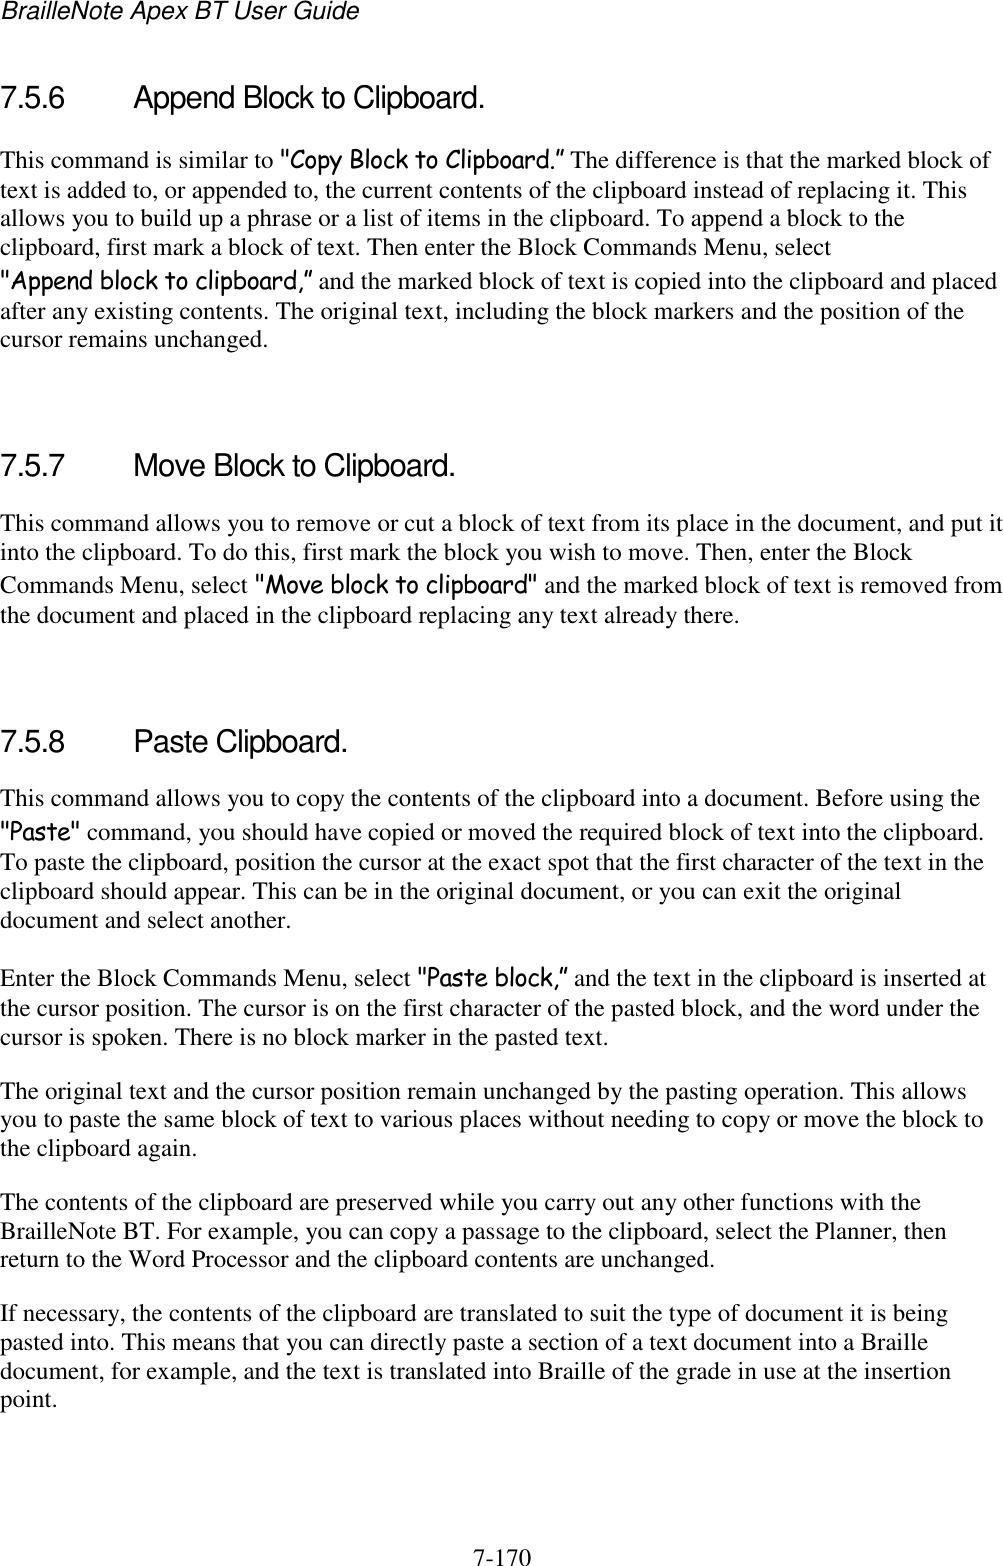 BrailleNote Apex BT User Guide   7-170   7.5.6  Append Block to Clipboard. This command is similar to &quot;Copy Block to Clipboard.” The difference is that the marked block of text is added to, or appended to, the current contents of the clipboard instead of replacing it. This allows you to build up a phrase or a list of items in the clipboard. To append a block to the clipboard, first mark a block of text. Then enter the Block Commands Menu, select &quot;Append block to clipboard,” and the marked block of text is copied into the clipboard and placed after any existing contents. The original text, including the block markers and the position of the cursor remains unchanged.   7.5.7  Move Block to Clipboard. This command allows you to remove or cut a block of text from its place in the document, and put it into the clipboard. To do this, first mark the block you wish to move. Then, enter the Block Commands Menu, select &quot;Move block to clipboard&quot; and the marked block of text is removed from the document and placed in the clipboard replacing any text already there.   7.5.8  Paste Clipboard. This command allows you to copy the contents of the clipboard into a document. Before using the &quot;Paste&quot; command, you should have copied or moved the required block of text into the clipboard. To paste the clipboard, position the cursor at the exact spot that the first character of the text in the clipboard should appear. This can be in the original document, or you can exit the original document and select another. Enter the Block Commands Menu, select &quot;Paste block,” and the text in the clipboard is inserted at the cursor position. The cursor is on the first character of the pasted block, and the word under the cursor is spoken. There is no block marker in the pasted text. The original text and the cursor position remain unchanged by the pasting operation. This allows you to paste the same block of text to various places without needing to copy or move the block to the clipboard again. The contents of the clipboard are preserved while you carry out any other functions with the BrailleNote BT. For example, you can copy a passage to the clipboard, select the Planner, then return to the Word Processor and the clipboard contents are unchanged. If necessary, the contents of the clipboard are translated to suit the type of document it is being pasted into. This means that you can directly paste a section of a text document into a Braille document, for example, and the text is translated into Braille of the grade in use at the insertion point.   